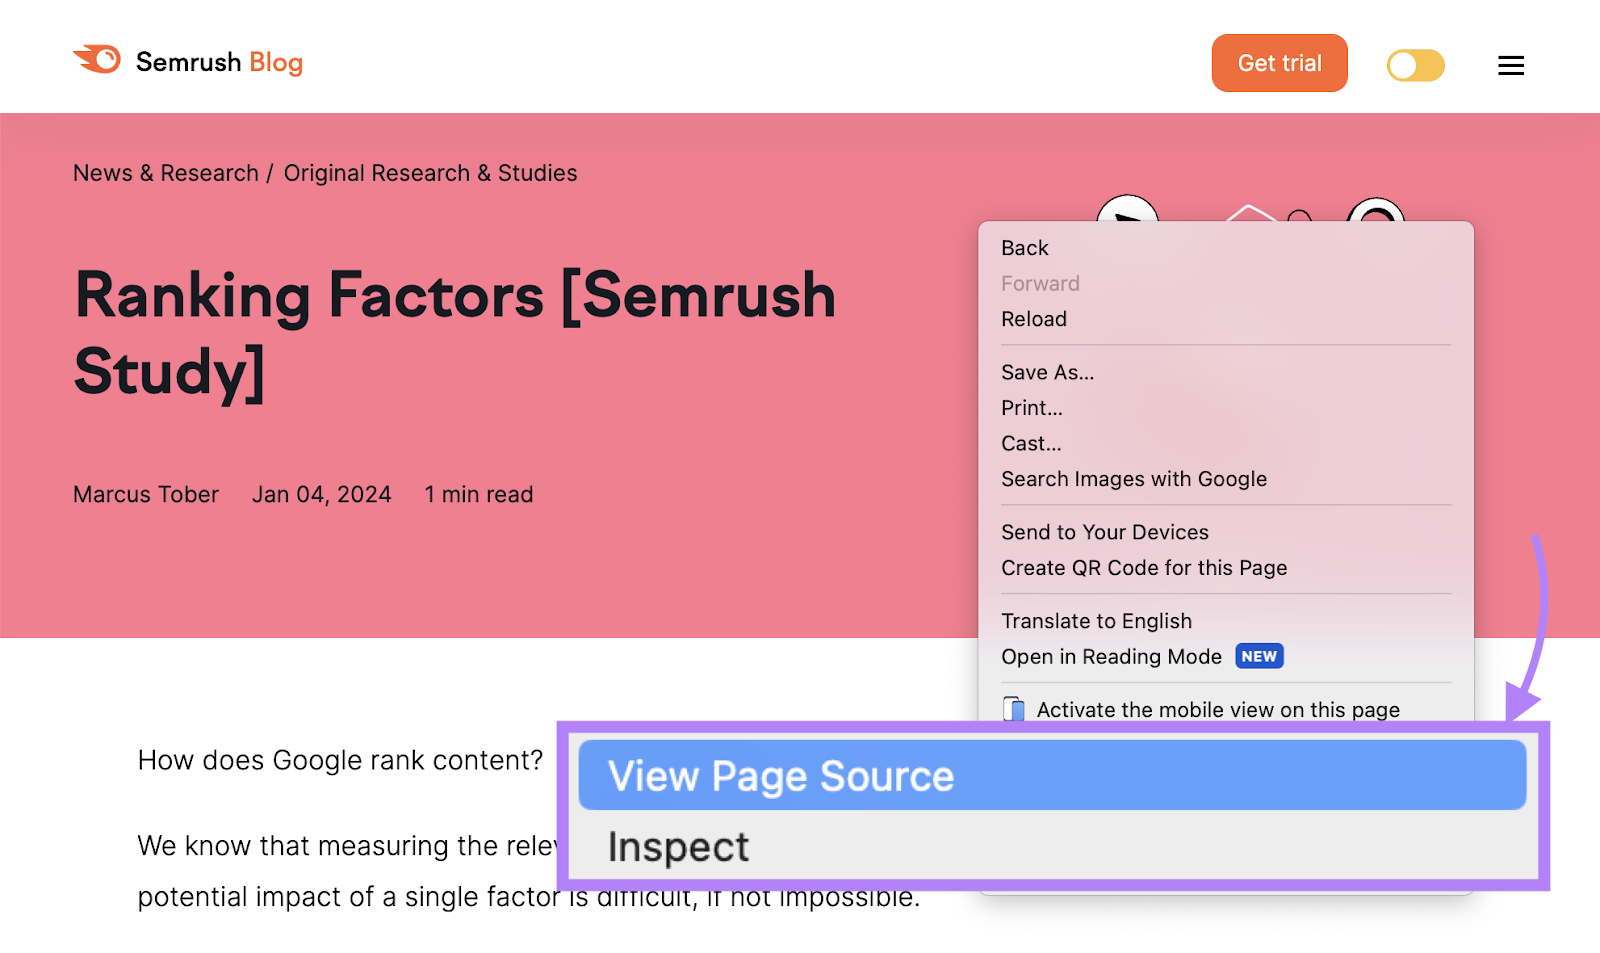 “View Page Source” button on Semrush Blog page